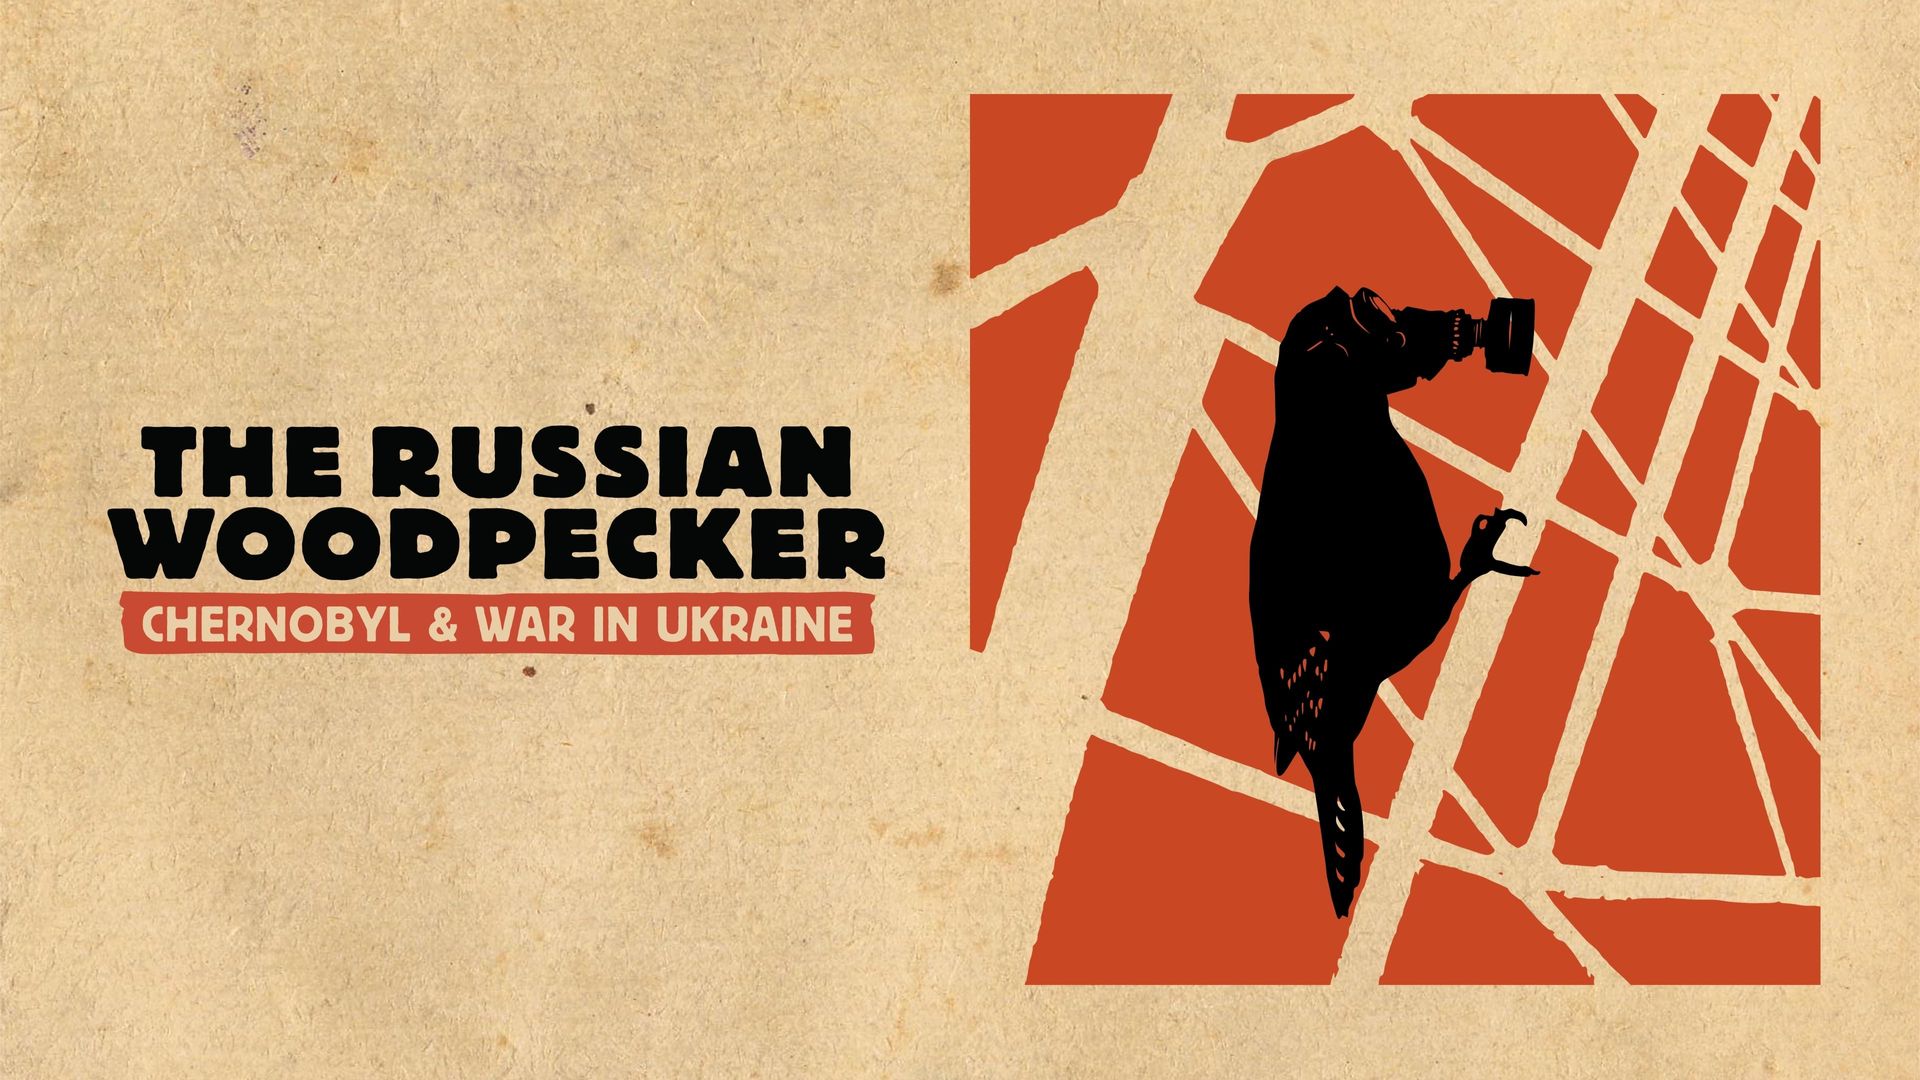 The Russian Woodpecker background